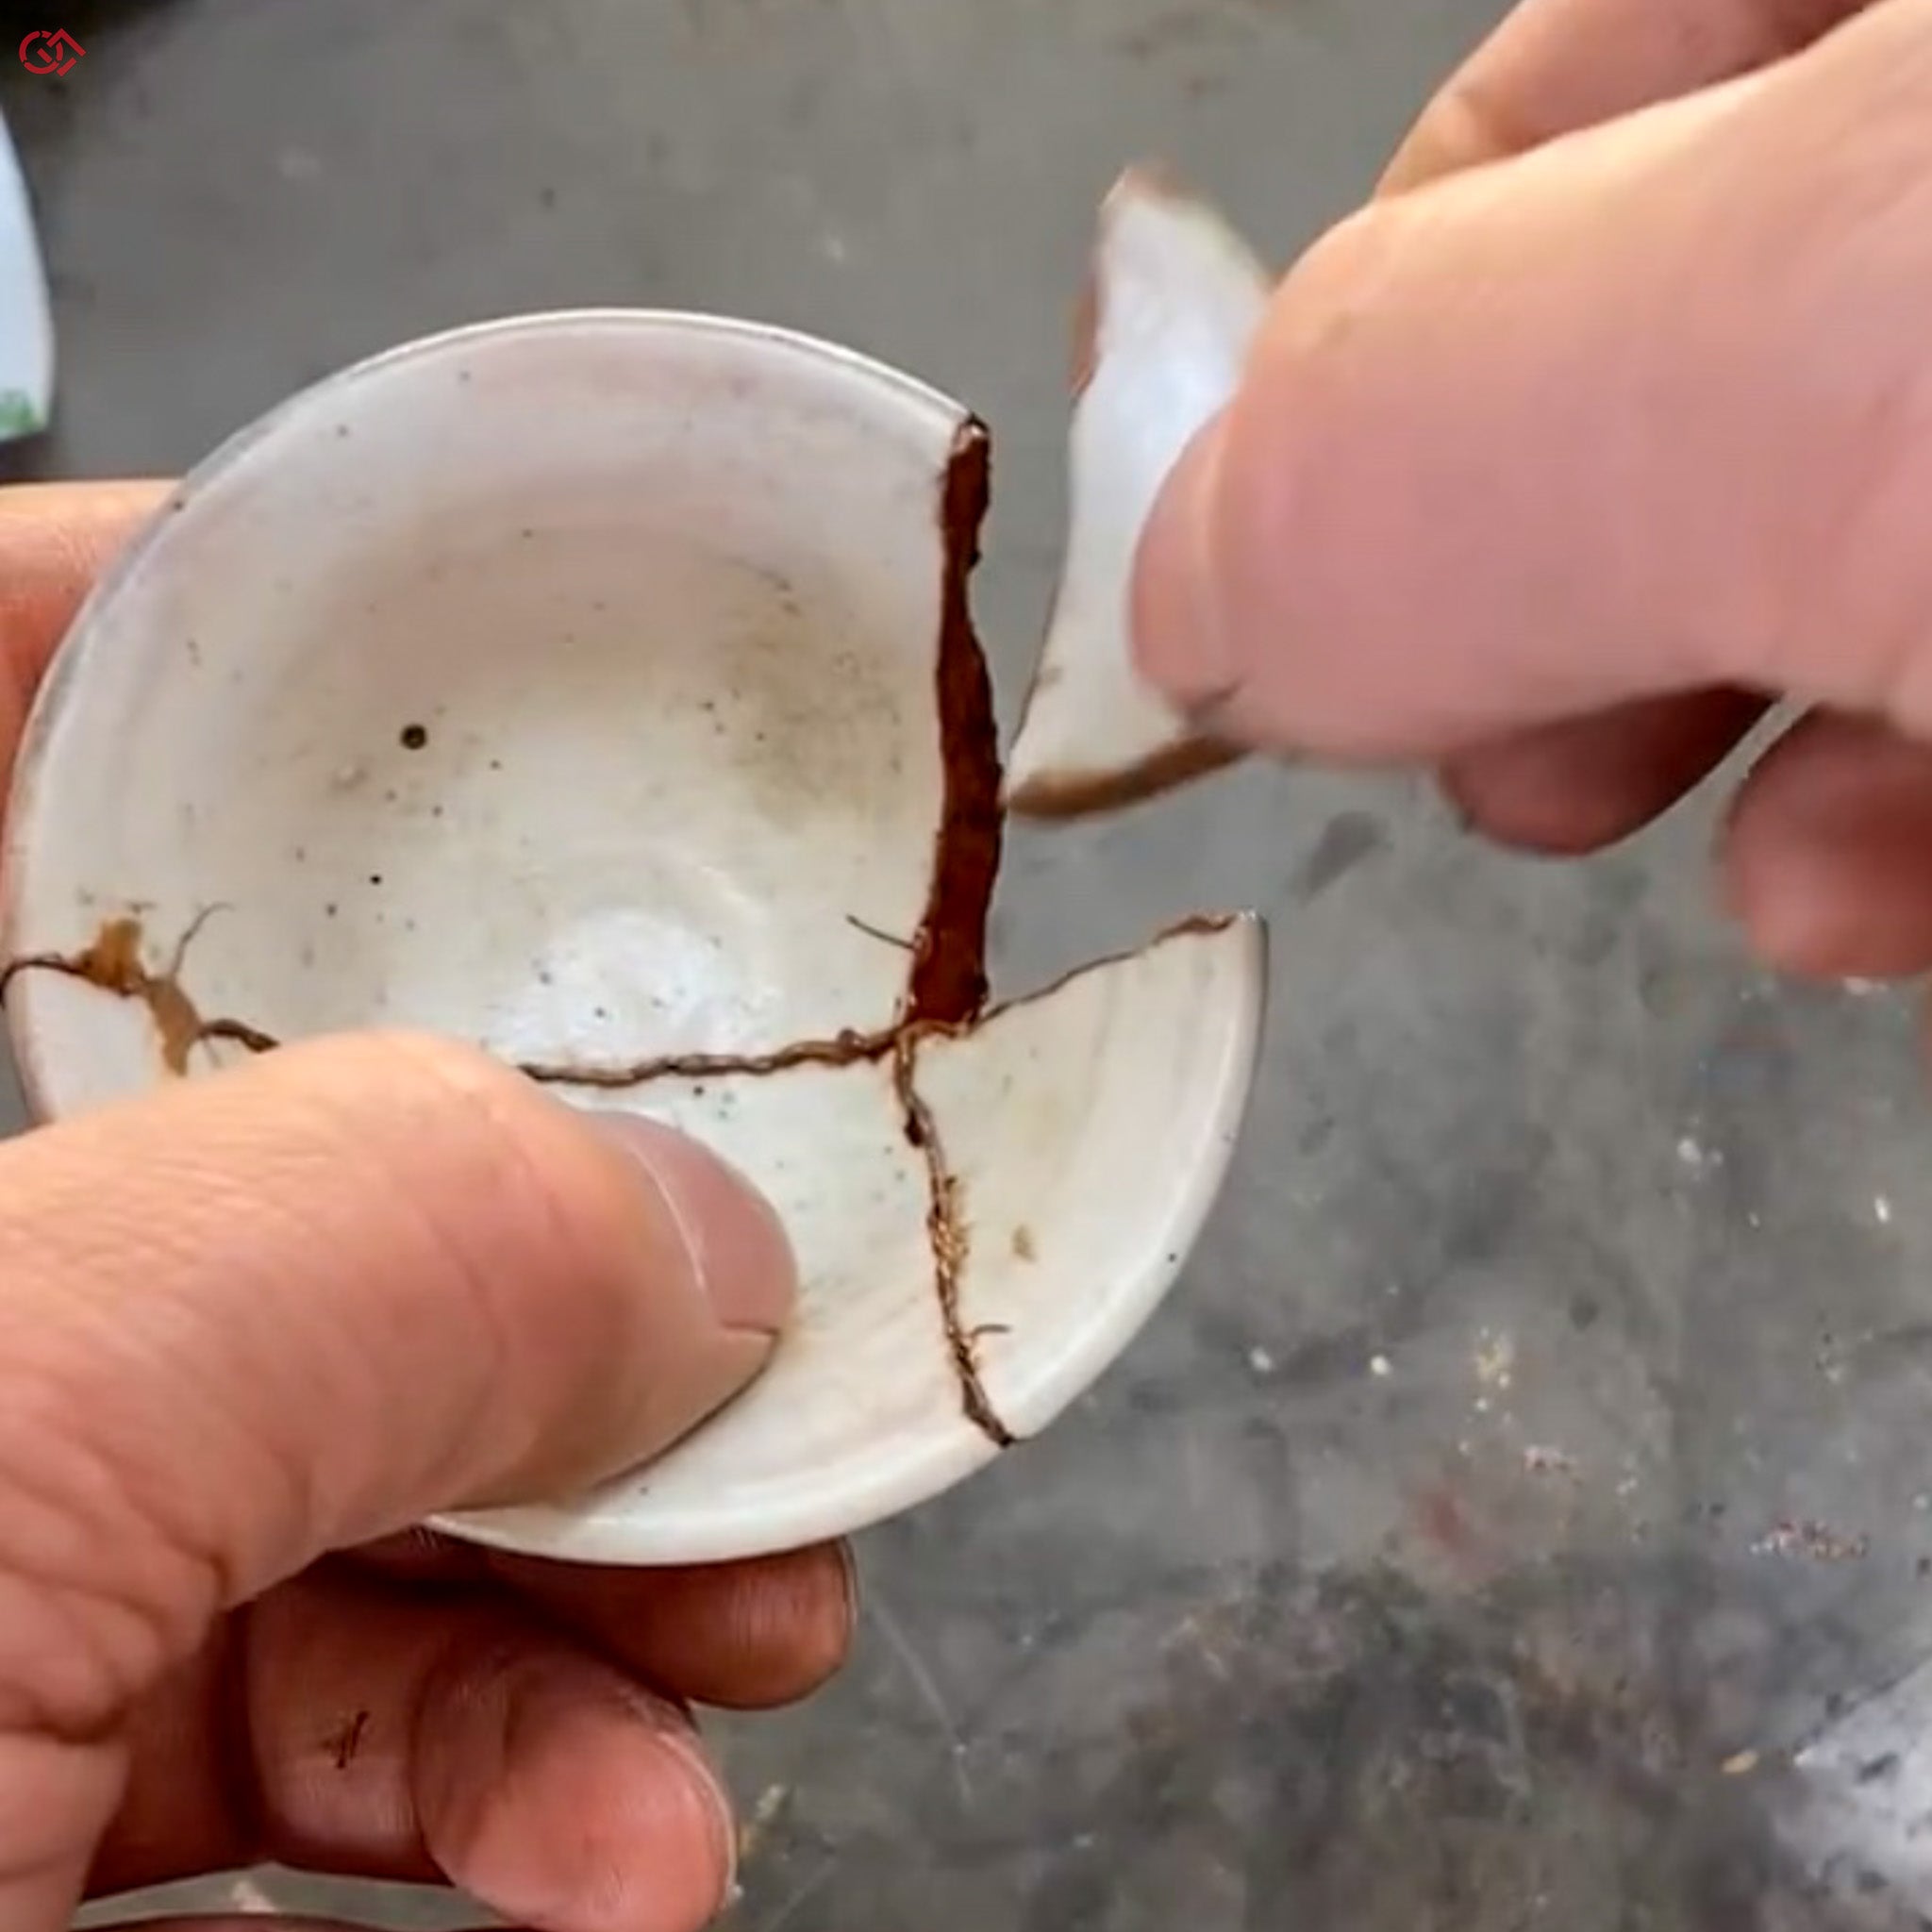 Traditional Kintsugi repair with natural lacquer